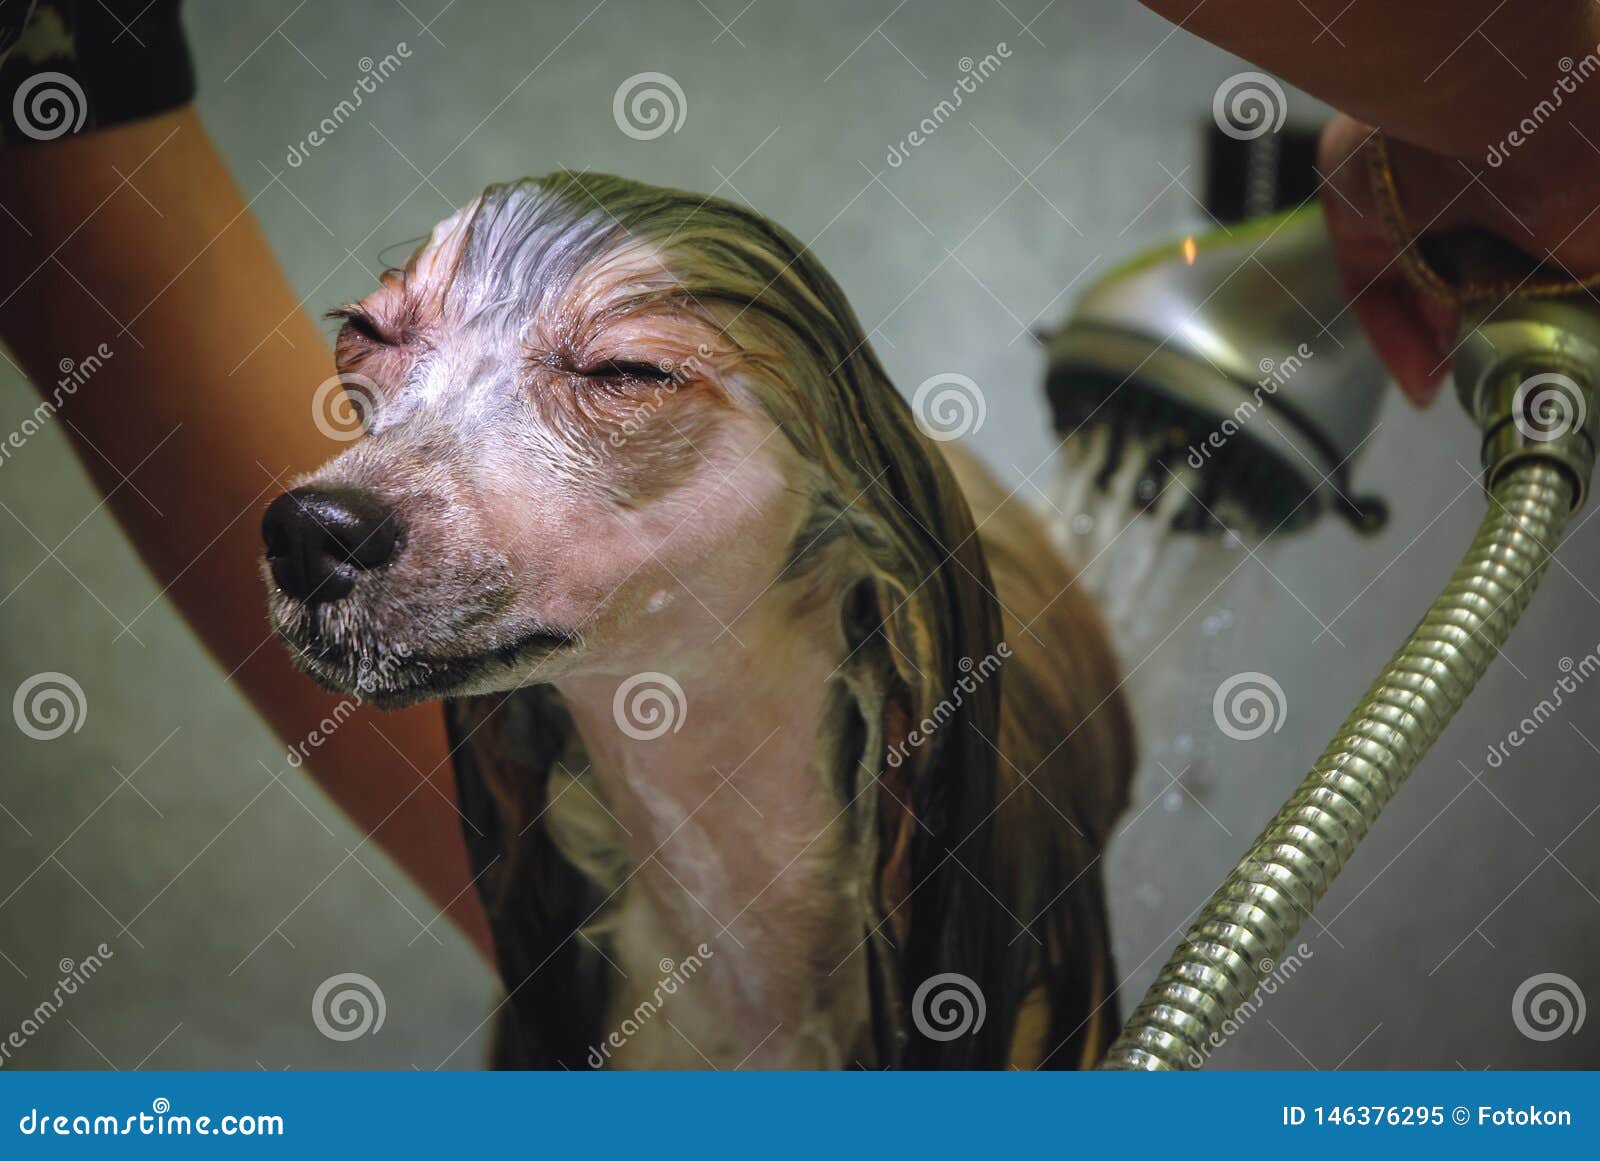 Dog Parlour in Warsaw stock image. Image of chinese